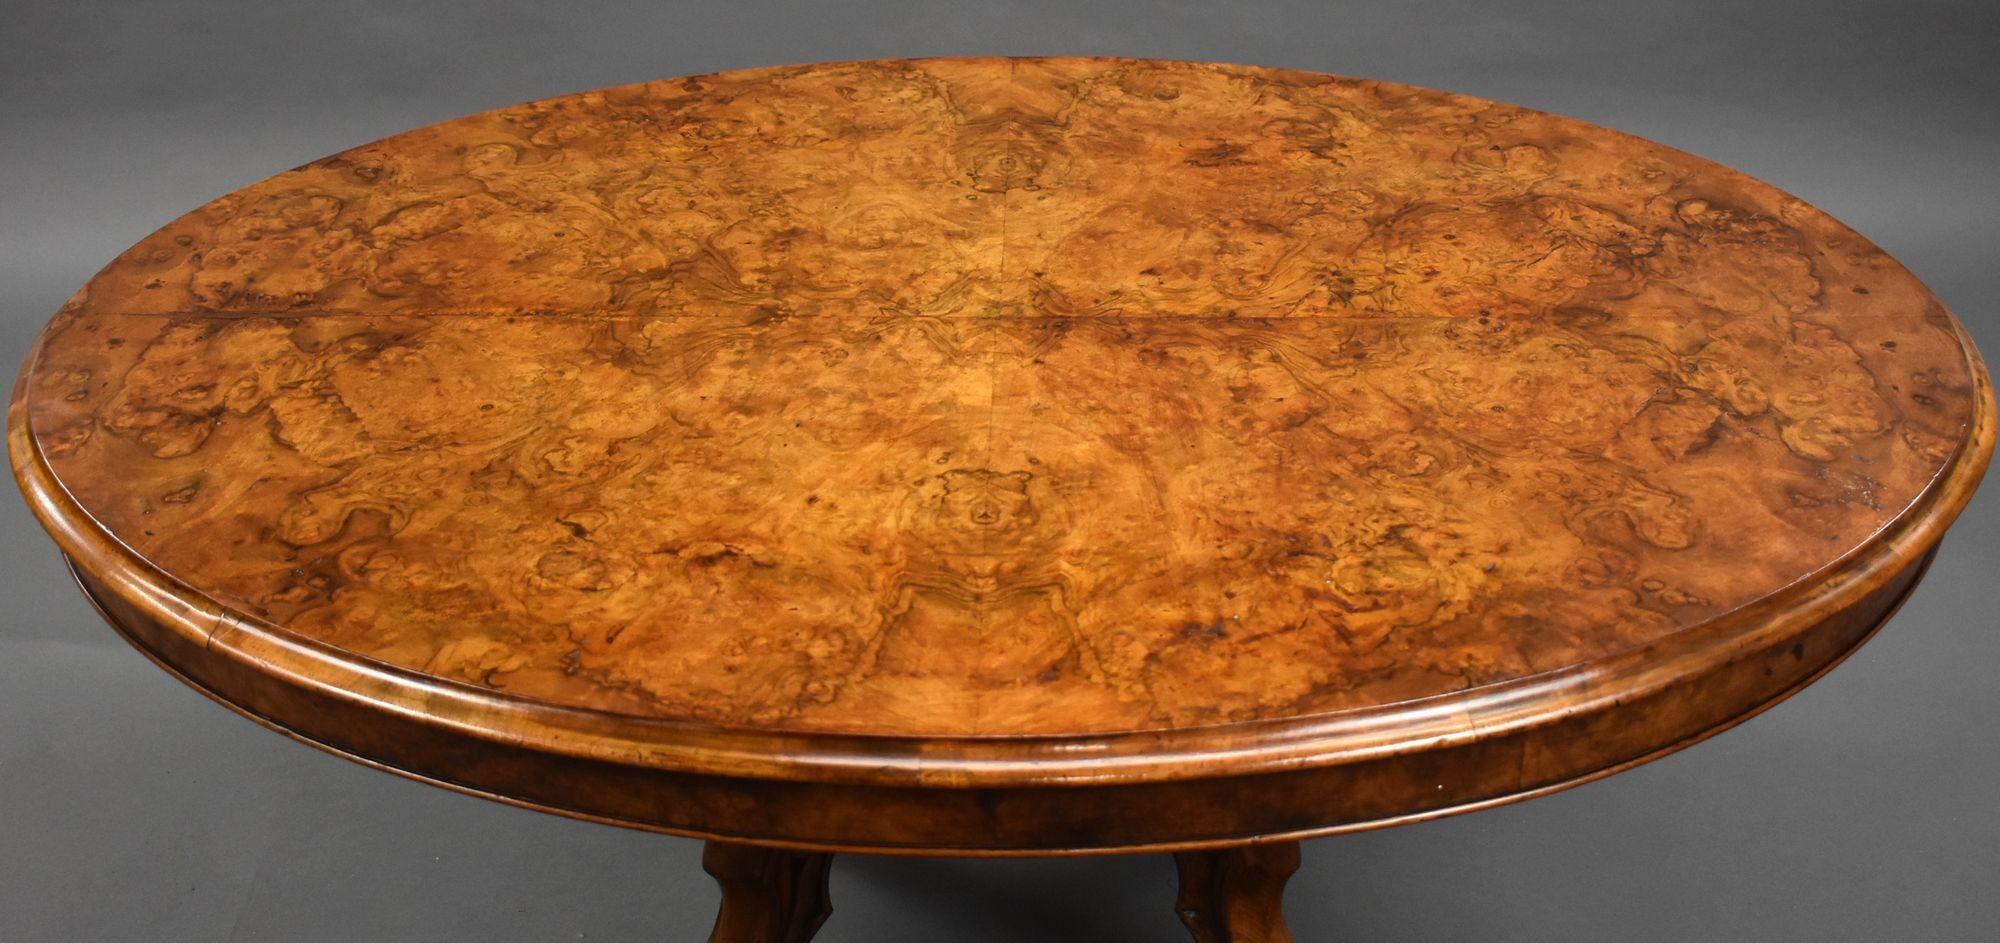 For sale is a good quality Victorian burr walnut oval coffee table, standing on an ornately carved base with scroll feet, the table is in good condition for its age, having a few very small blisters to the the top though we do not feel that this is